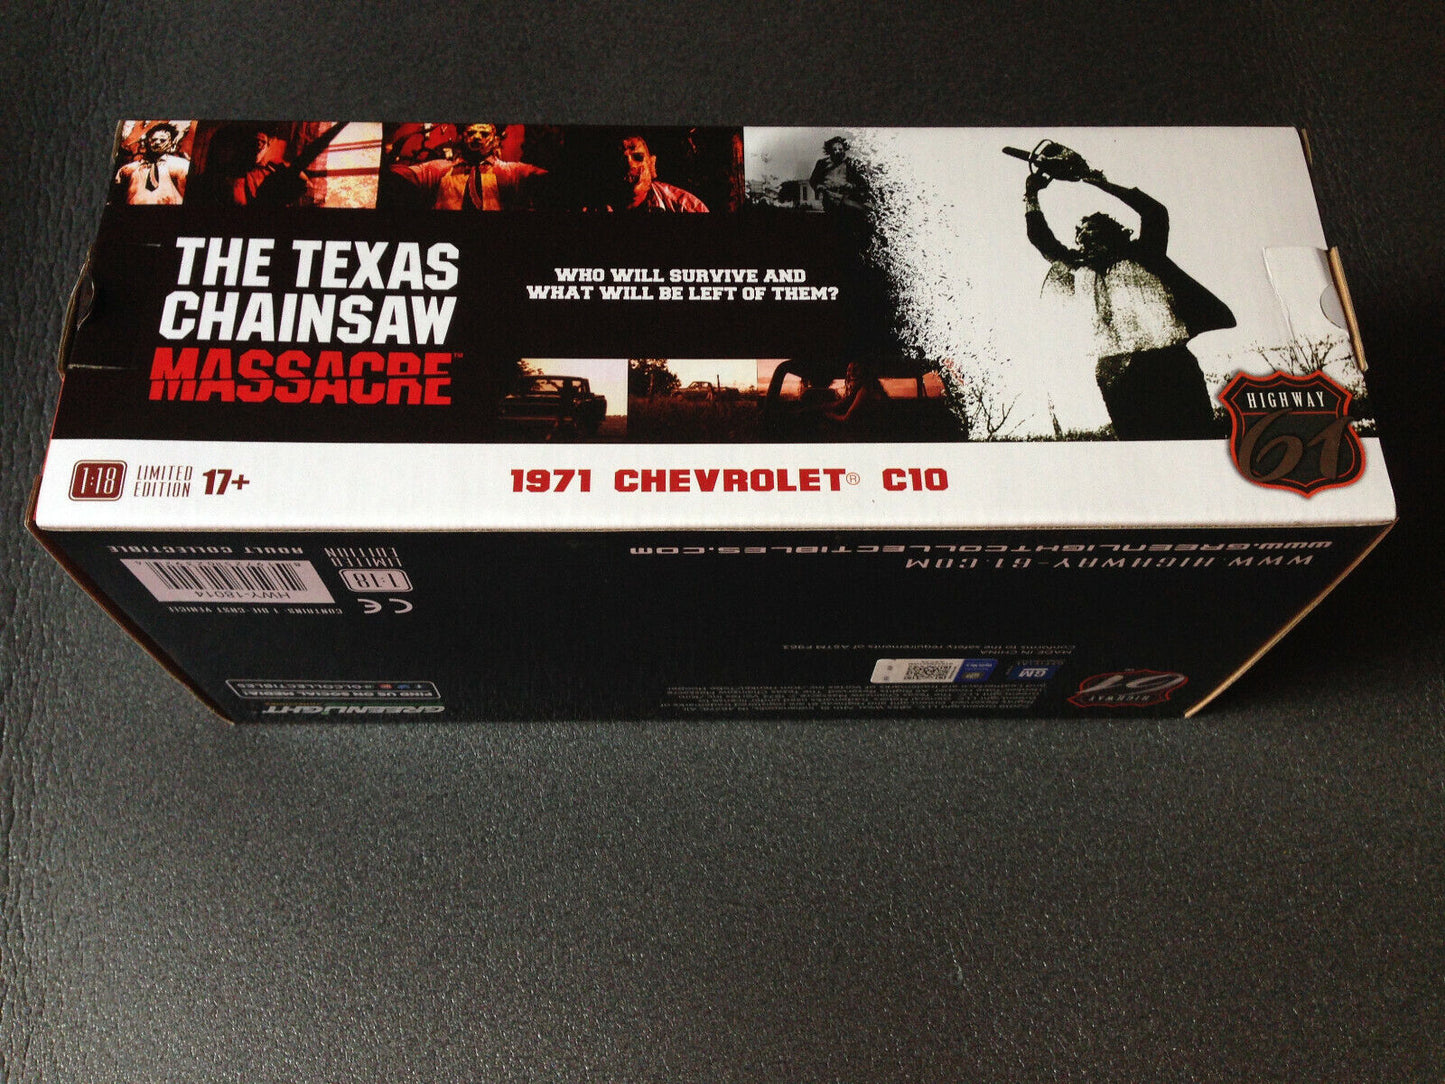 Chevrolet C10 1971 C-10 The Texas Chainsaw Massacre Highway61 Pick Up Truck 1:18